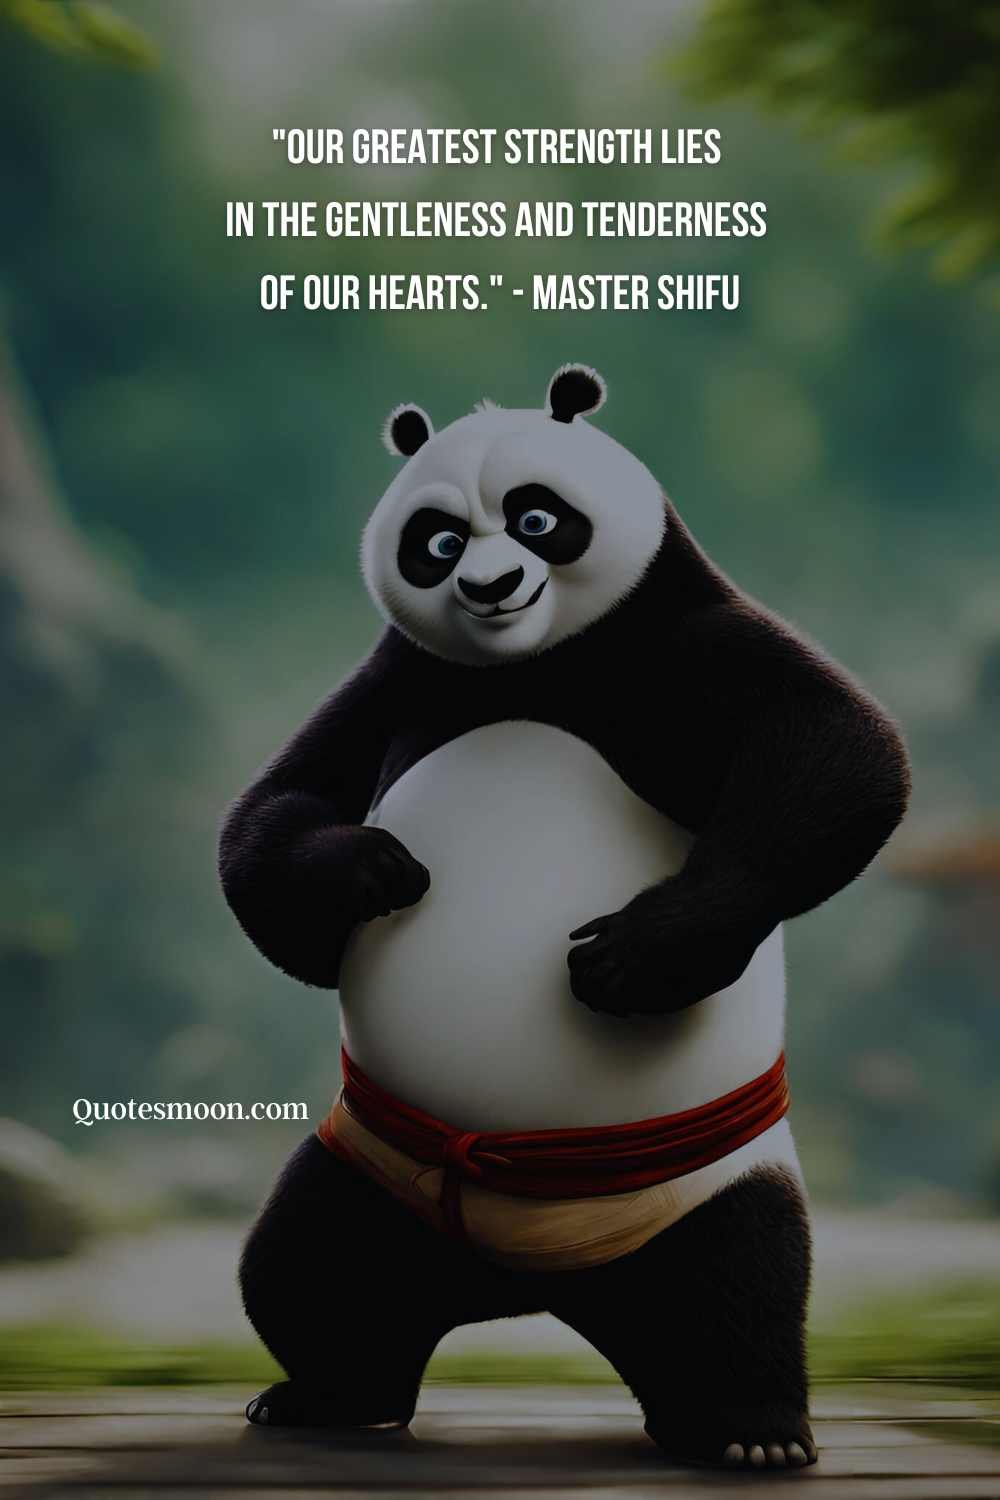 Memorable Quotes From Kung Fu Panda 2